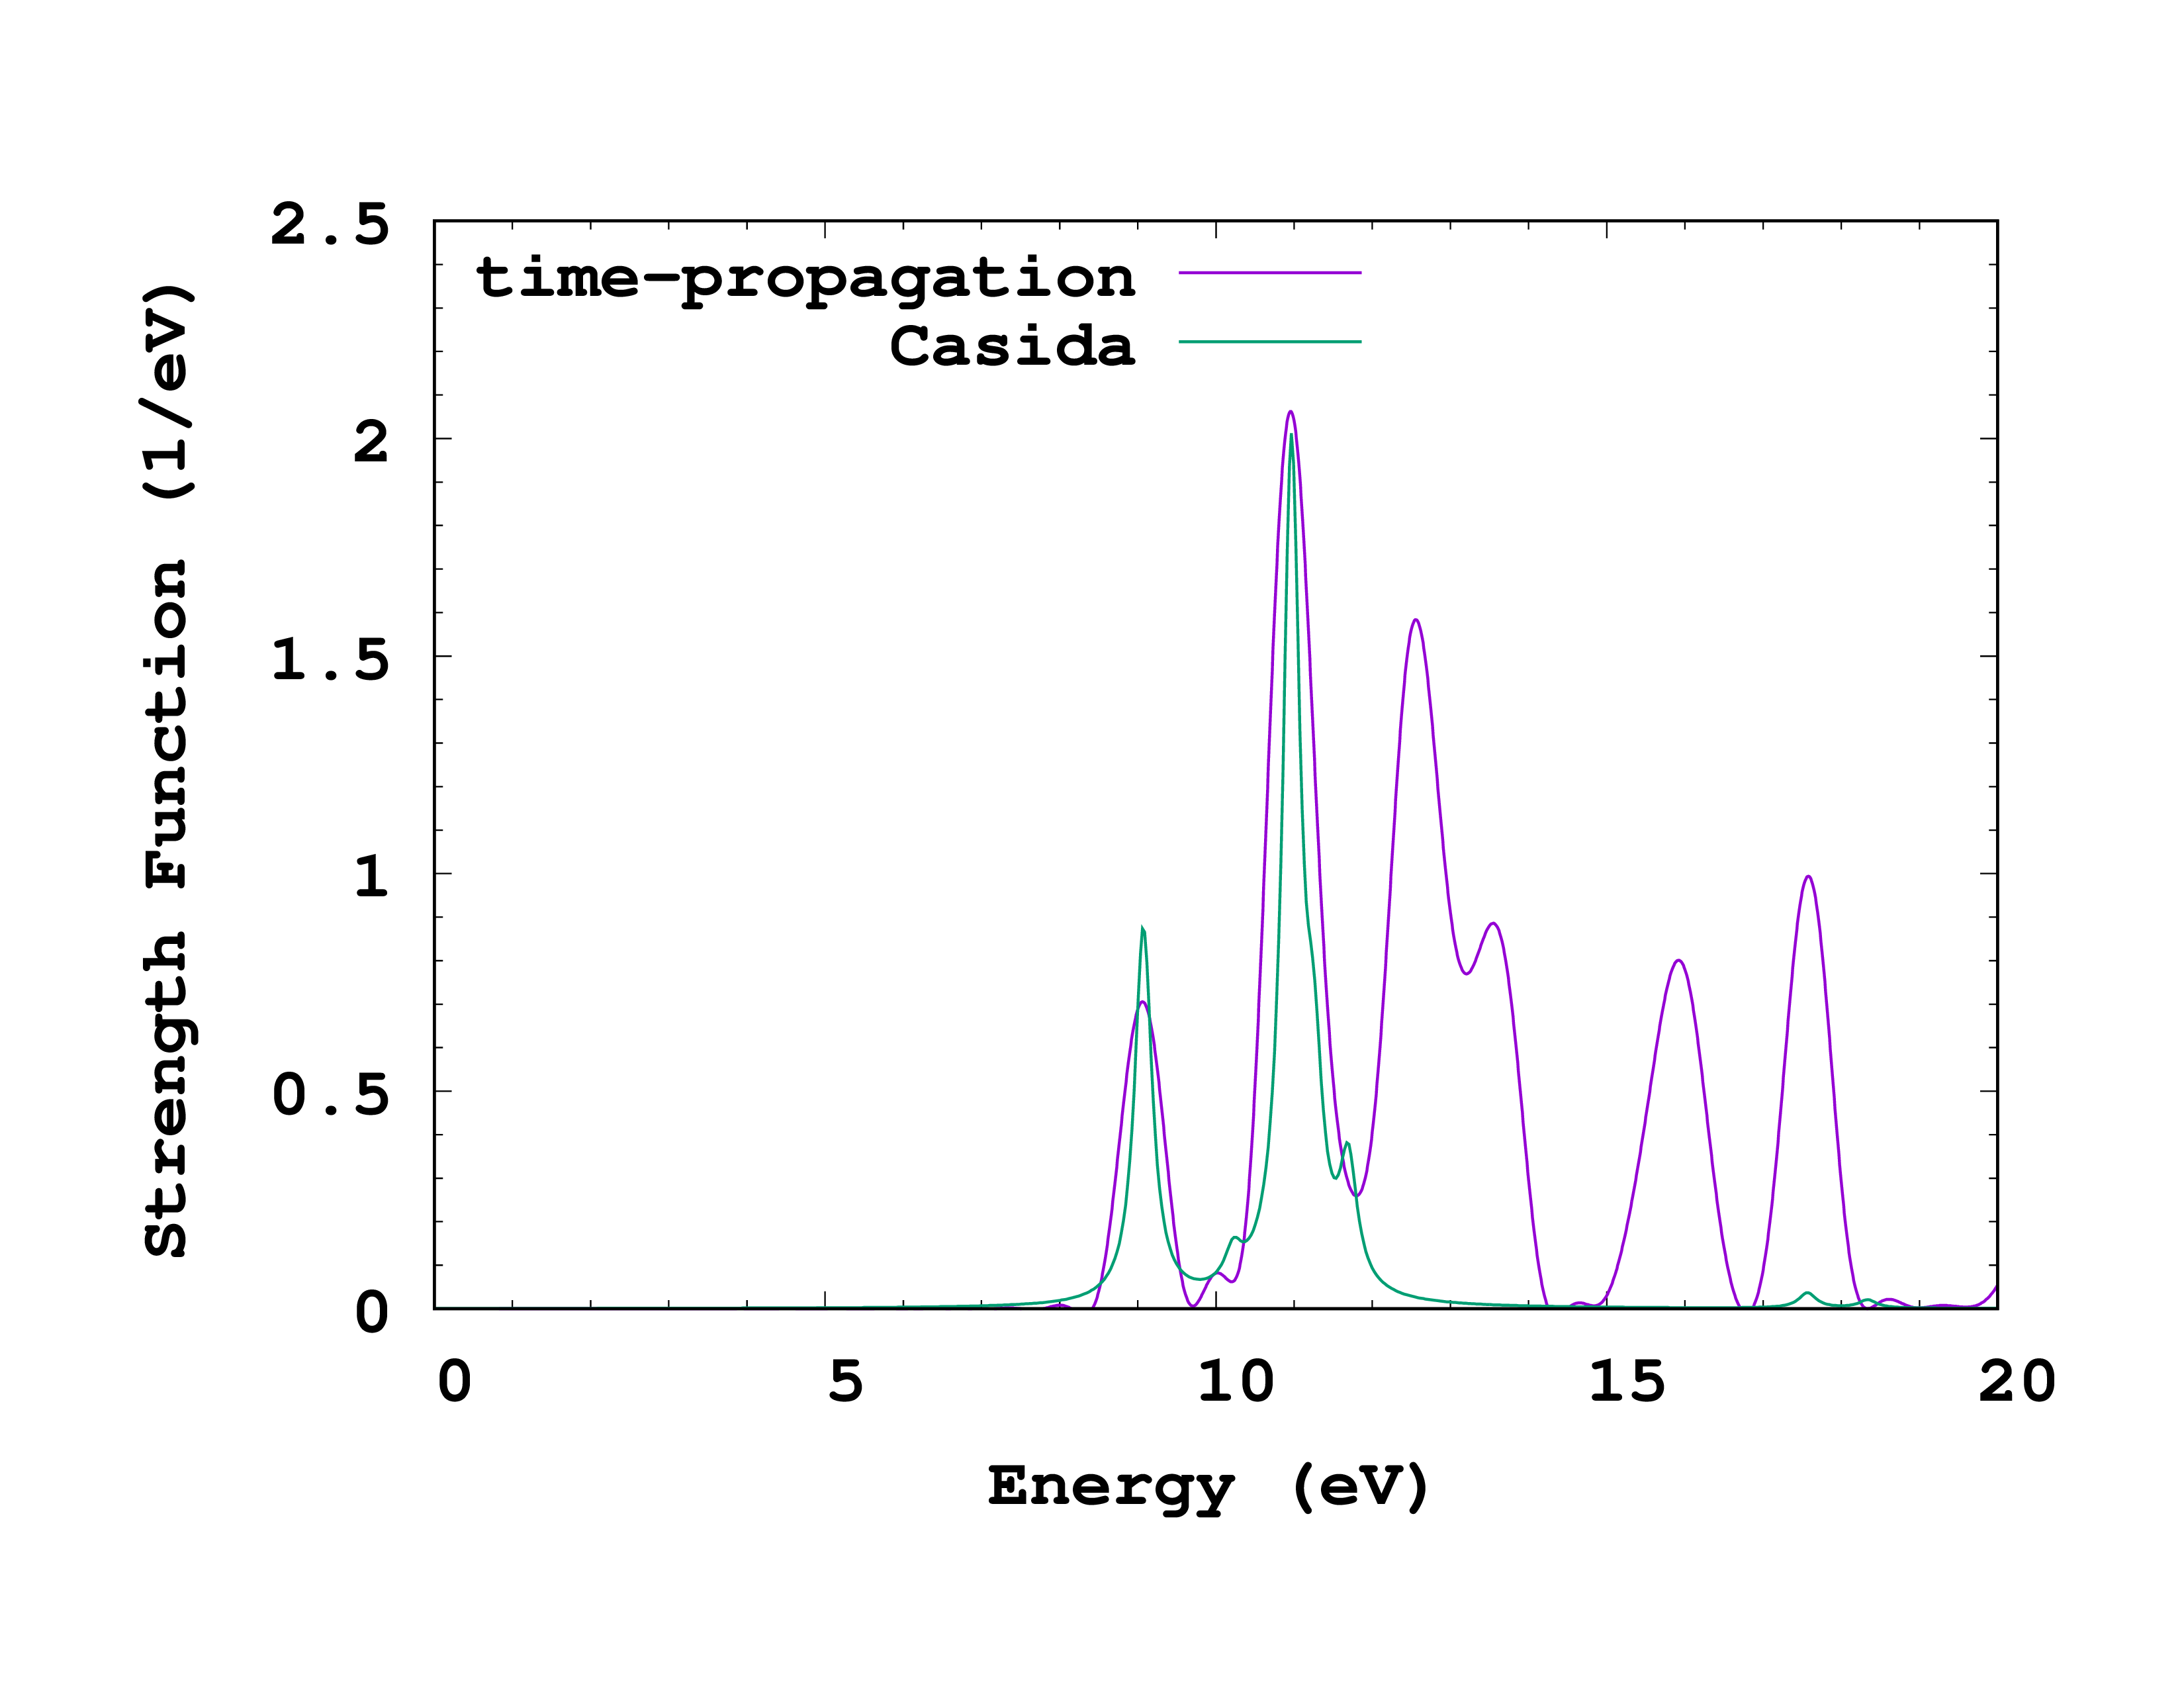 Comparison of triplet absorption spectrum of methane calculated with time-propagation and with the Casida equation.